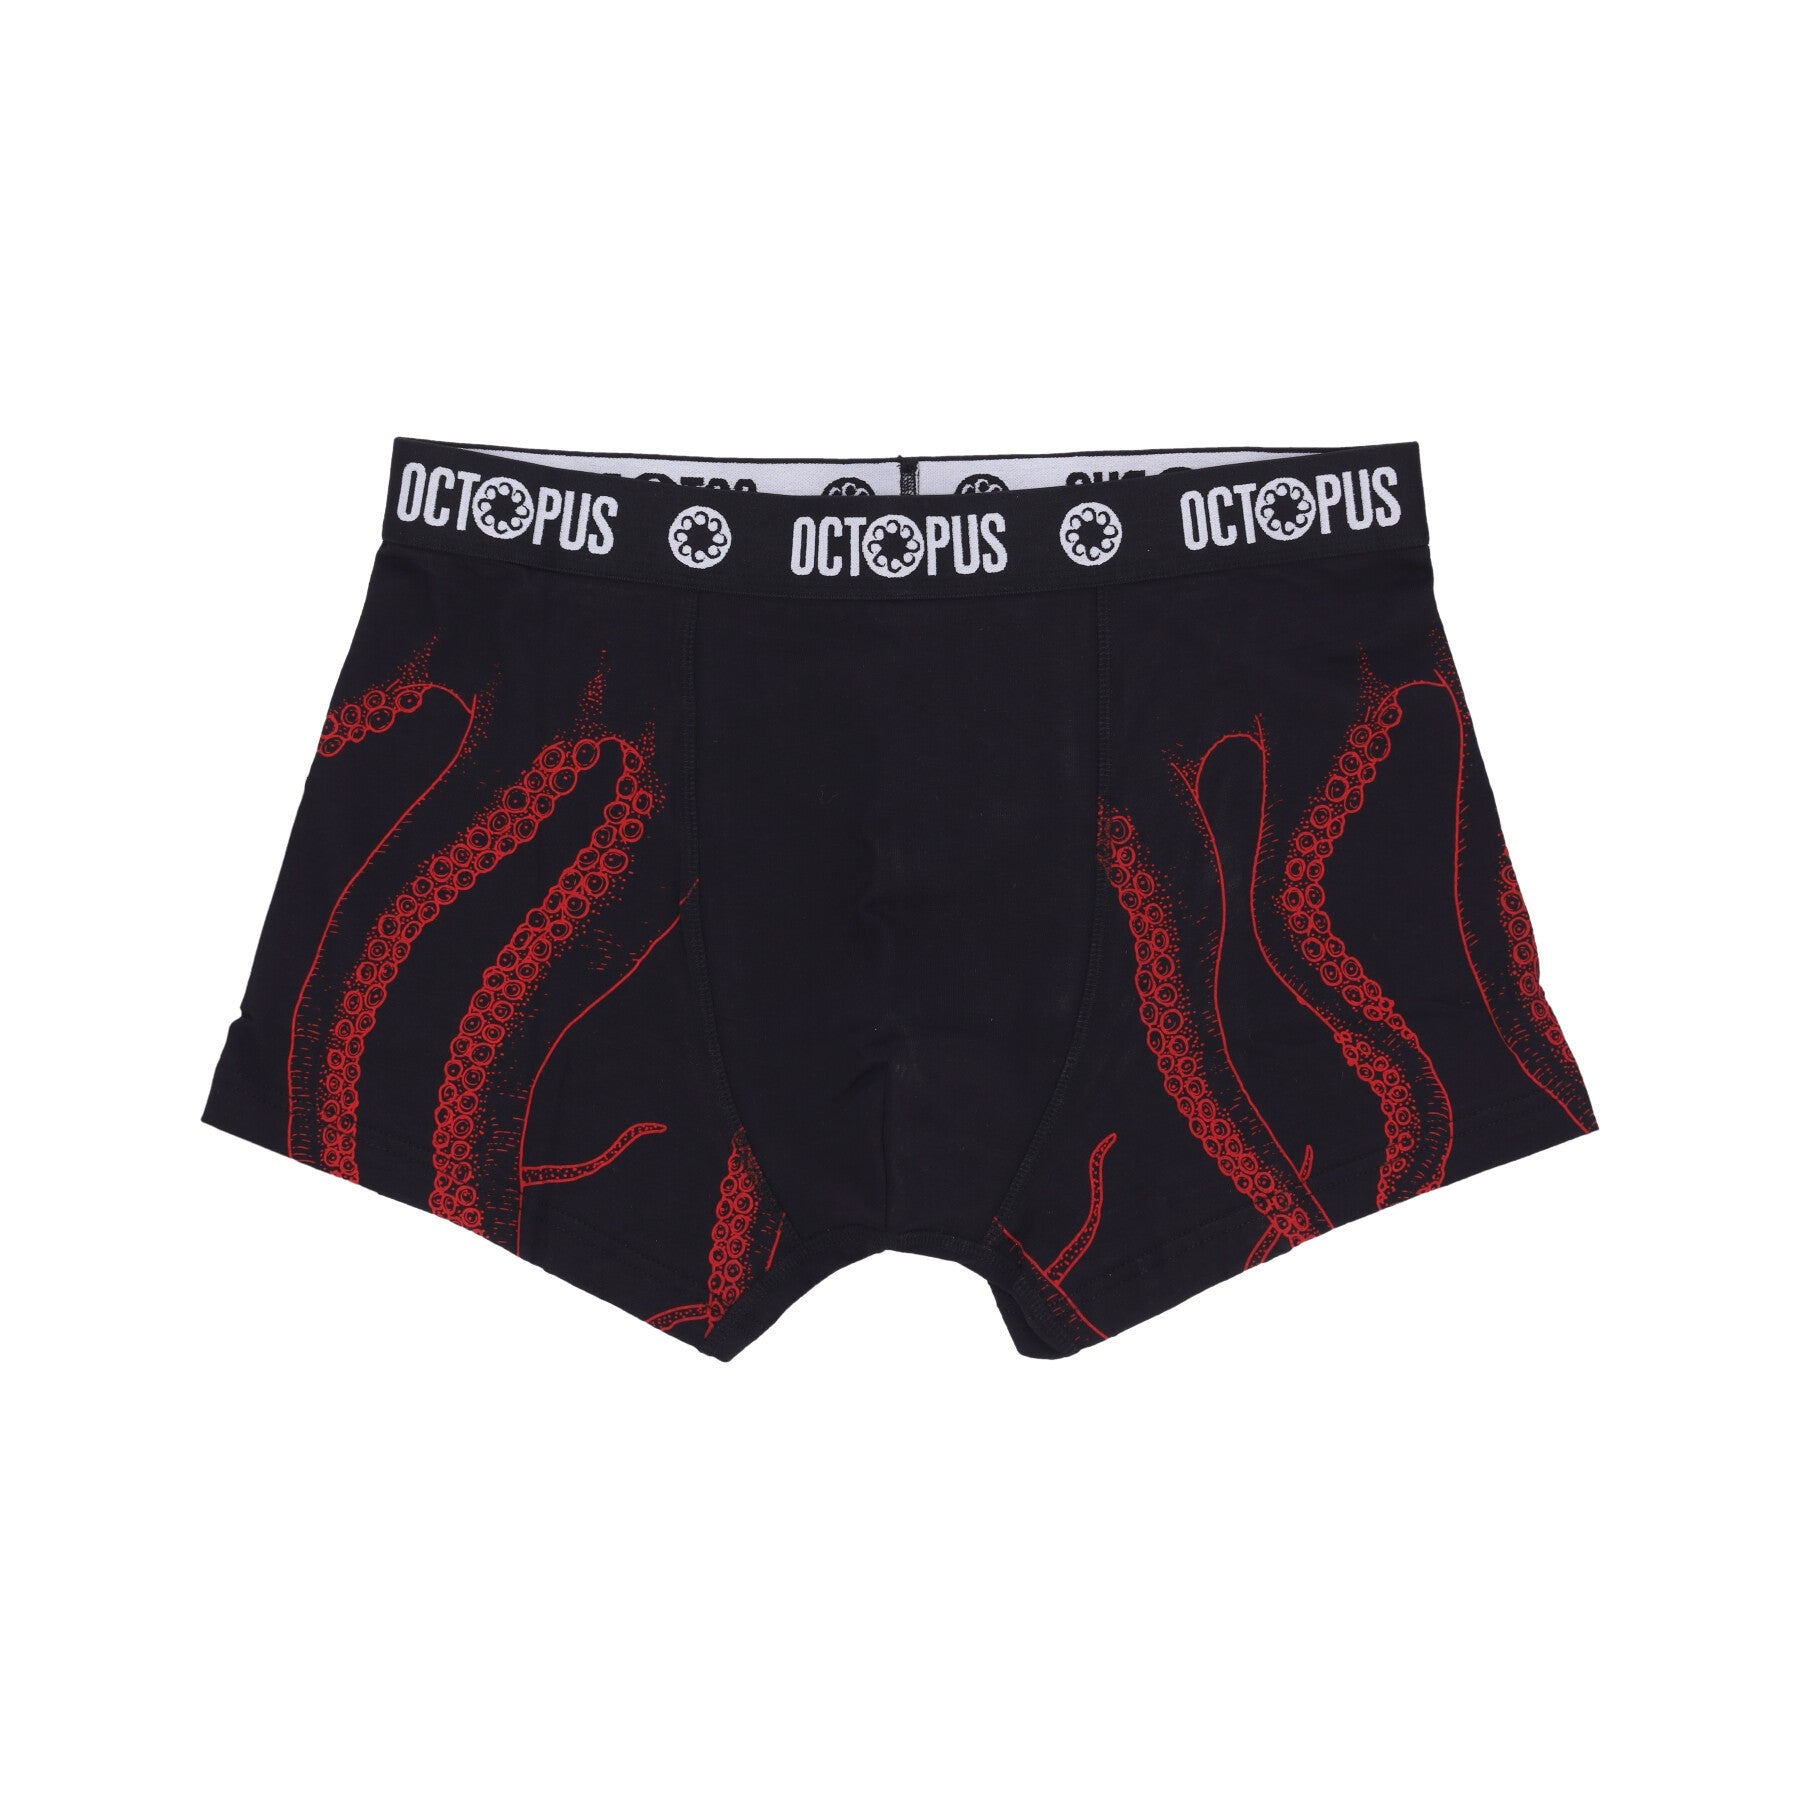 Octopus, Uomo Outline Boxer, Black/red